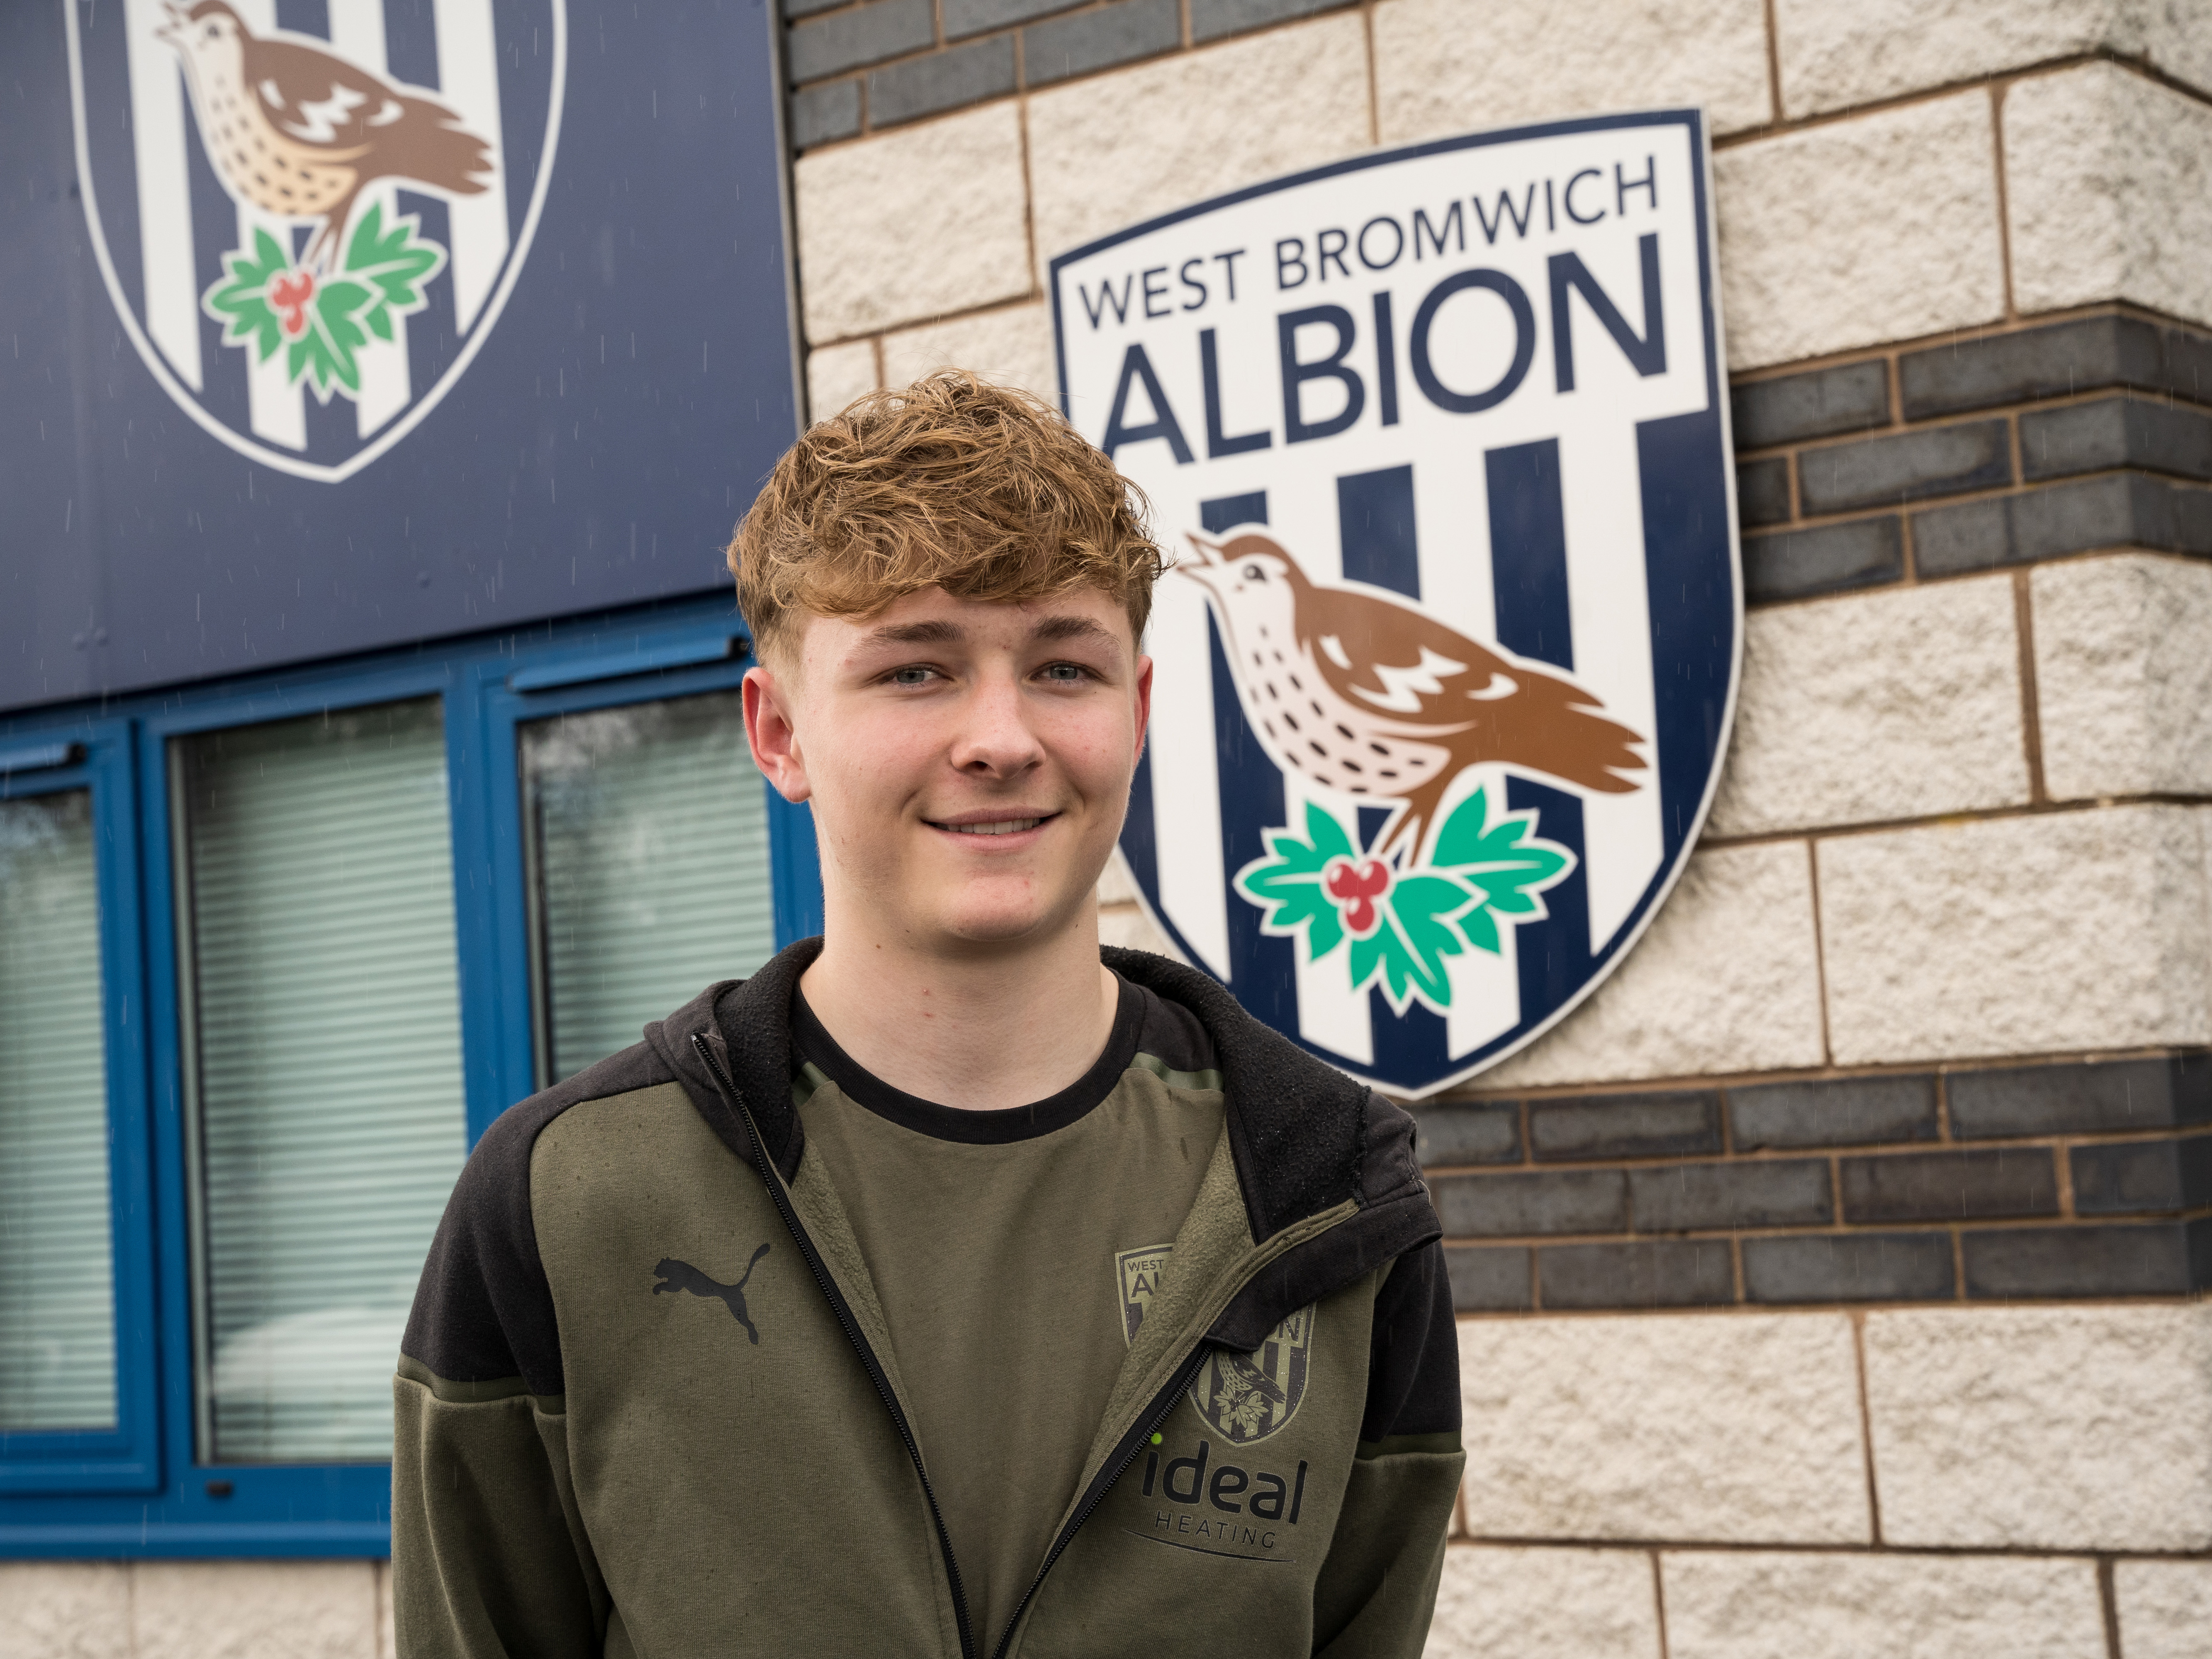 A photo of Albion youngster Ollie Bostock in front of the Albion Training Ground